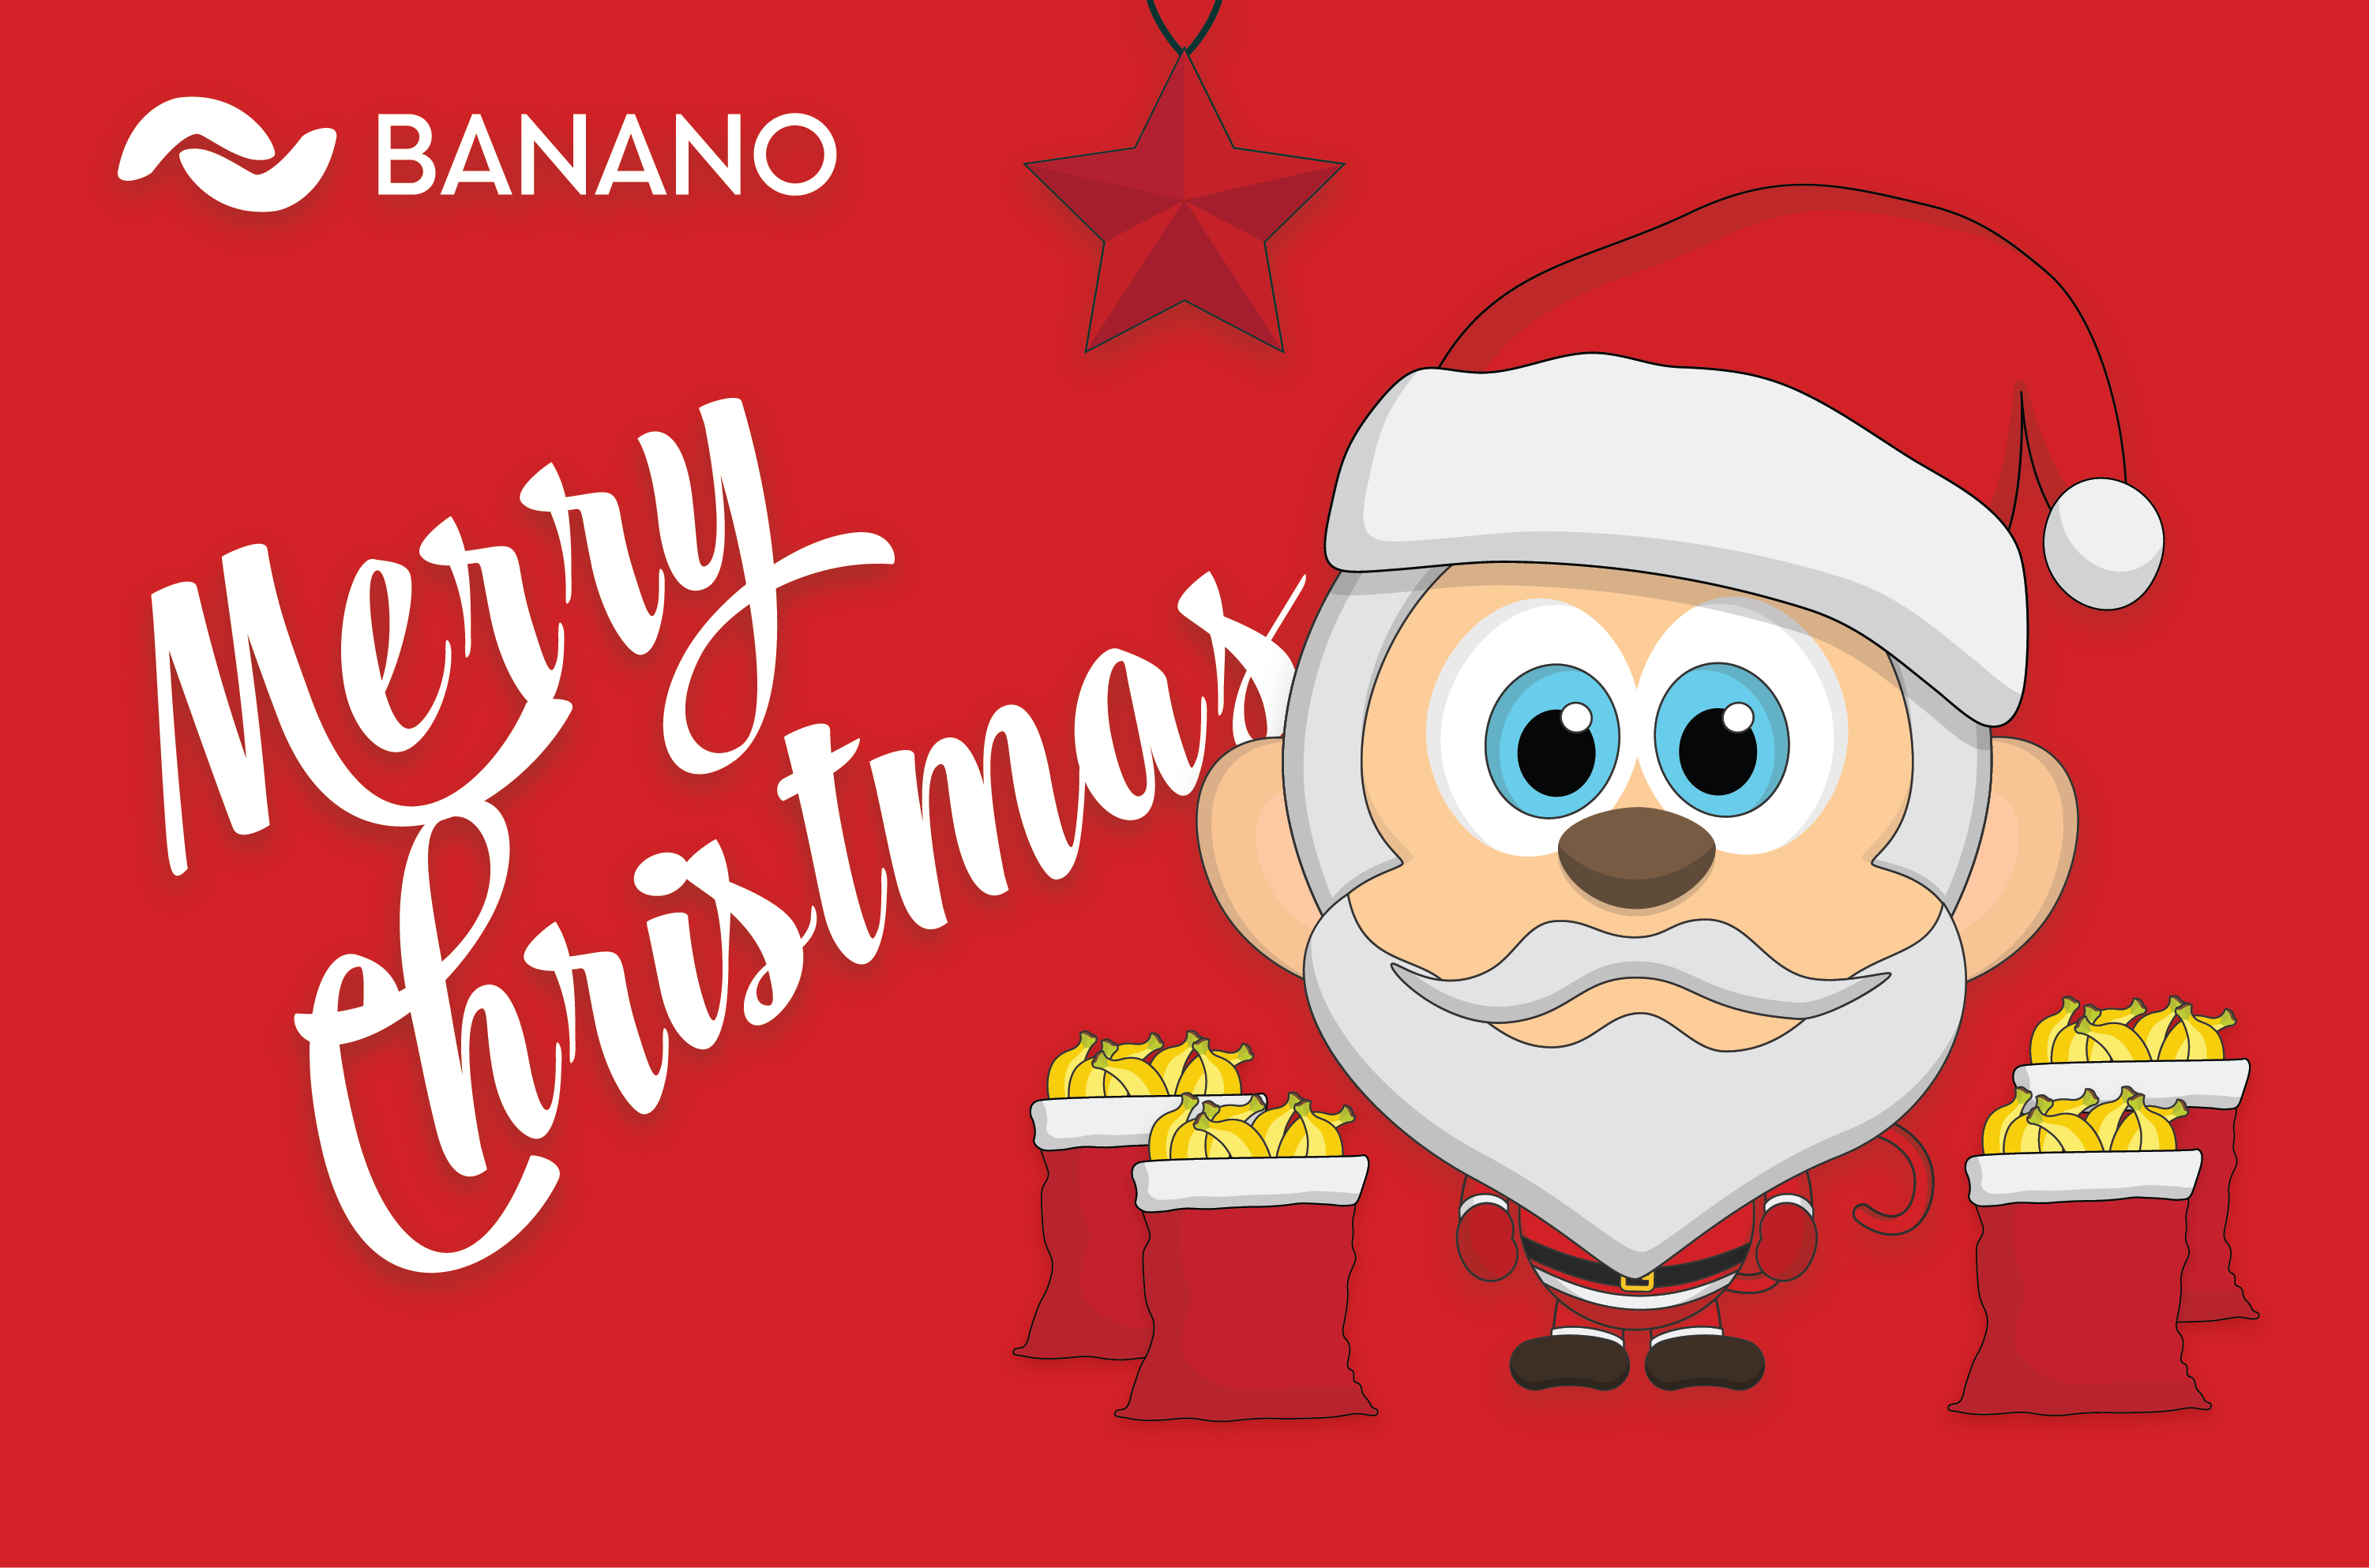 BANANO Wishes You a Very Merry Christmas!